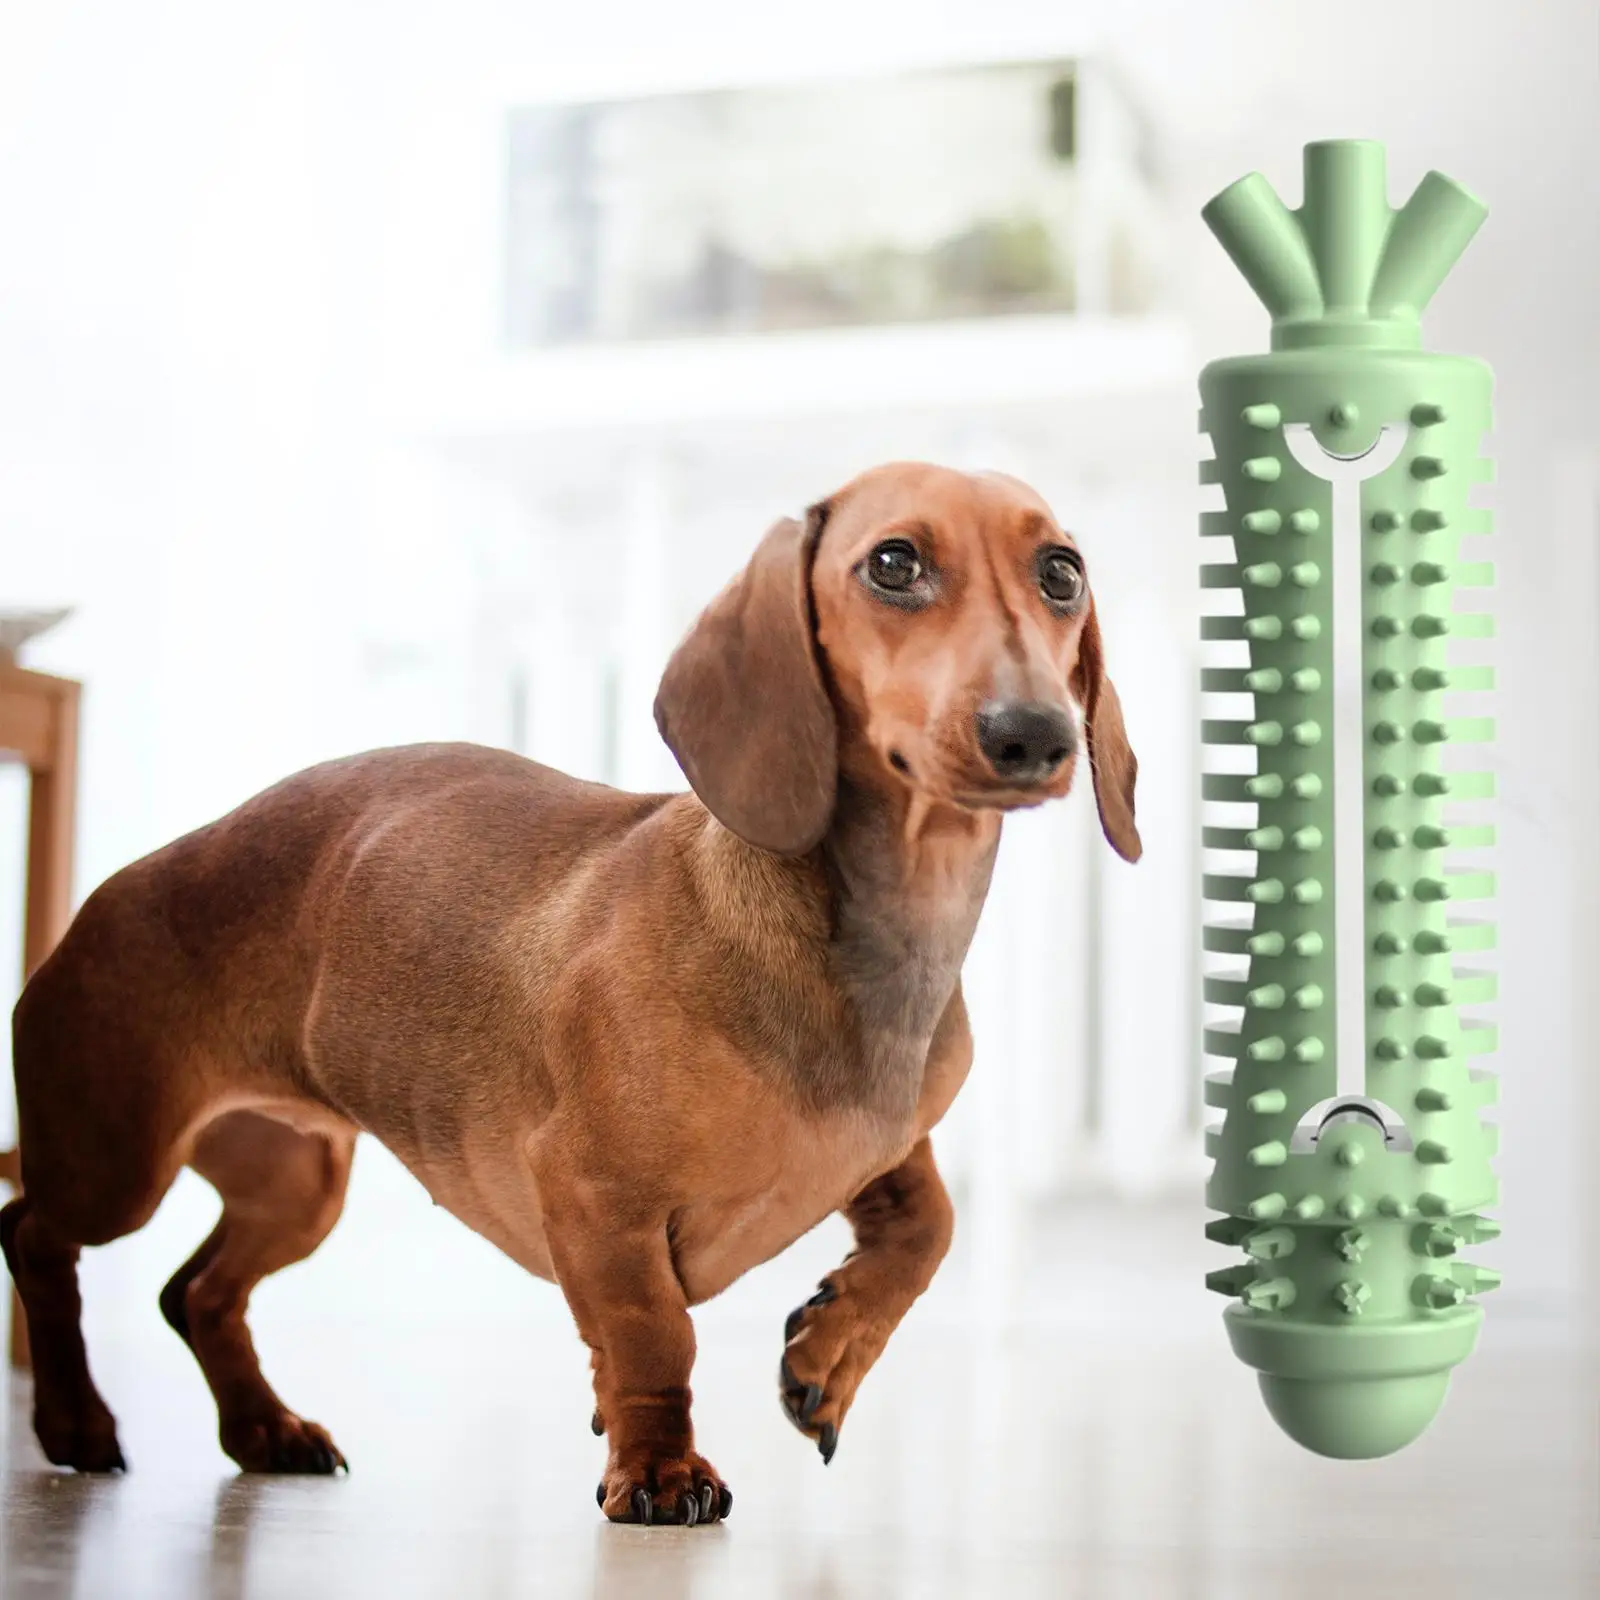 Dog Chew Toy Pet Interactive Toothbrush Travel Instinct Training Educational Toy Puppy Teething Toys for Small Medium Doggy